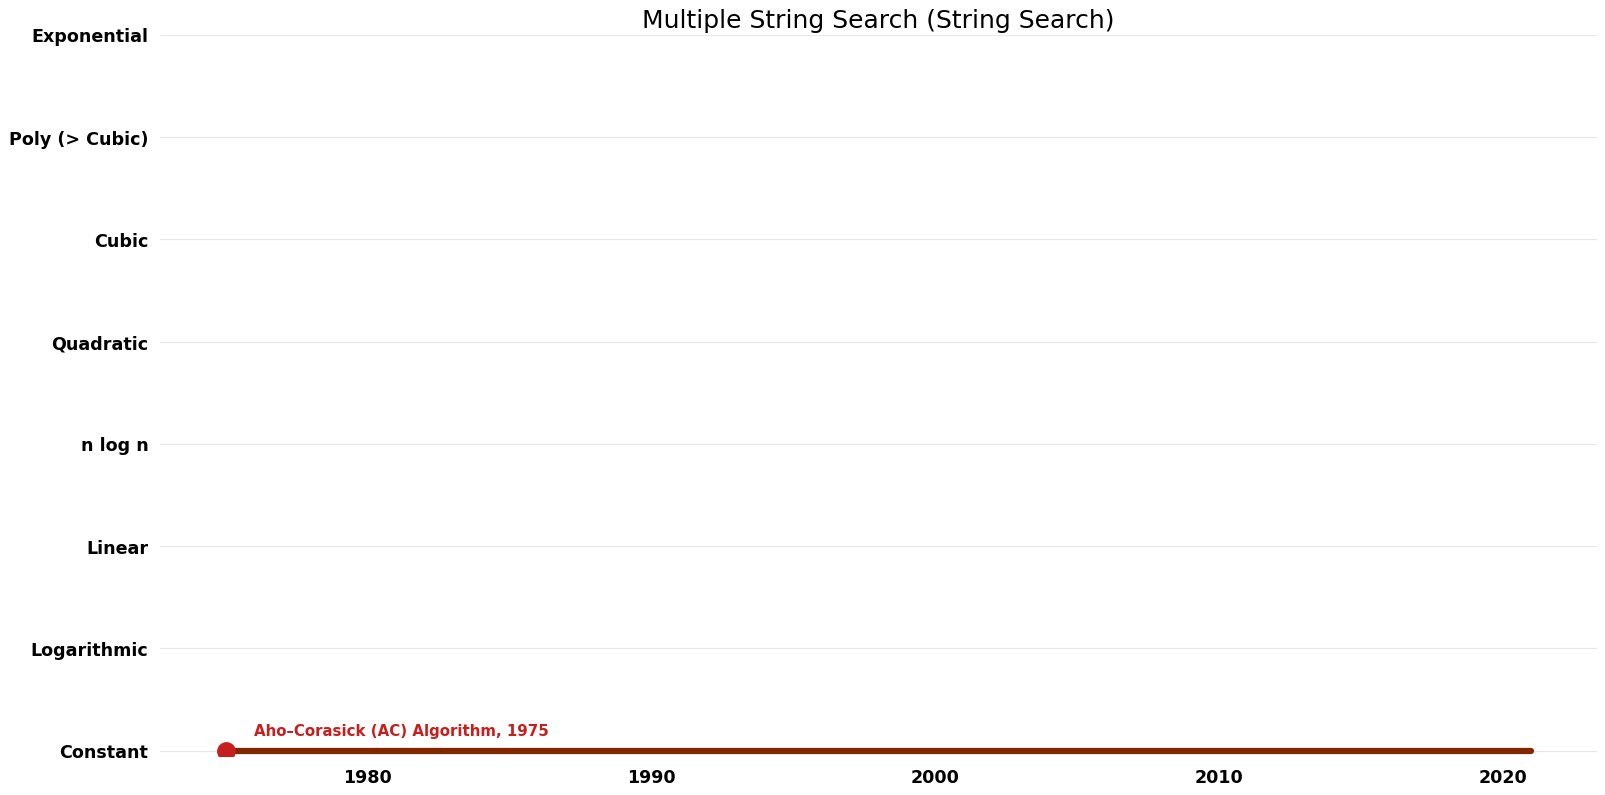 File:String Search - Multiple String Search - Space.png